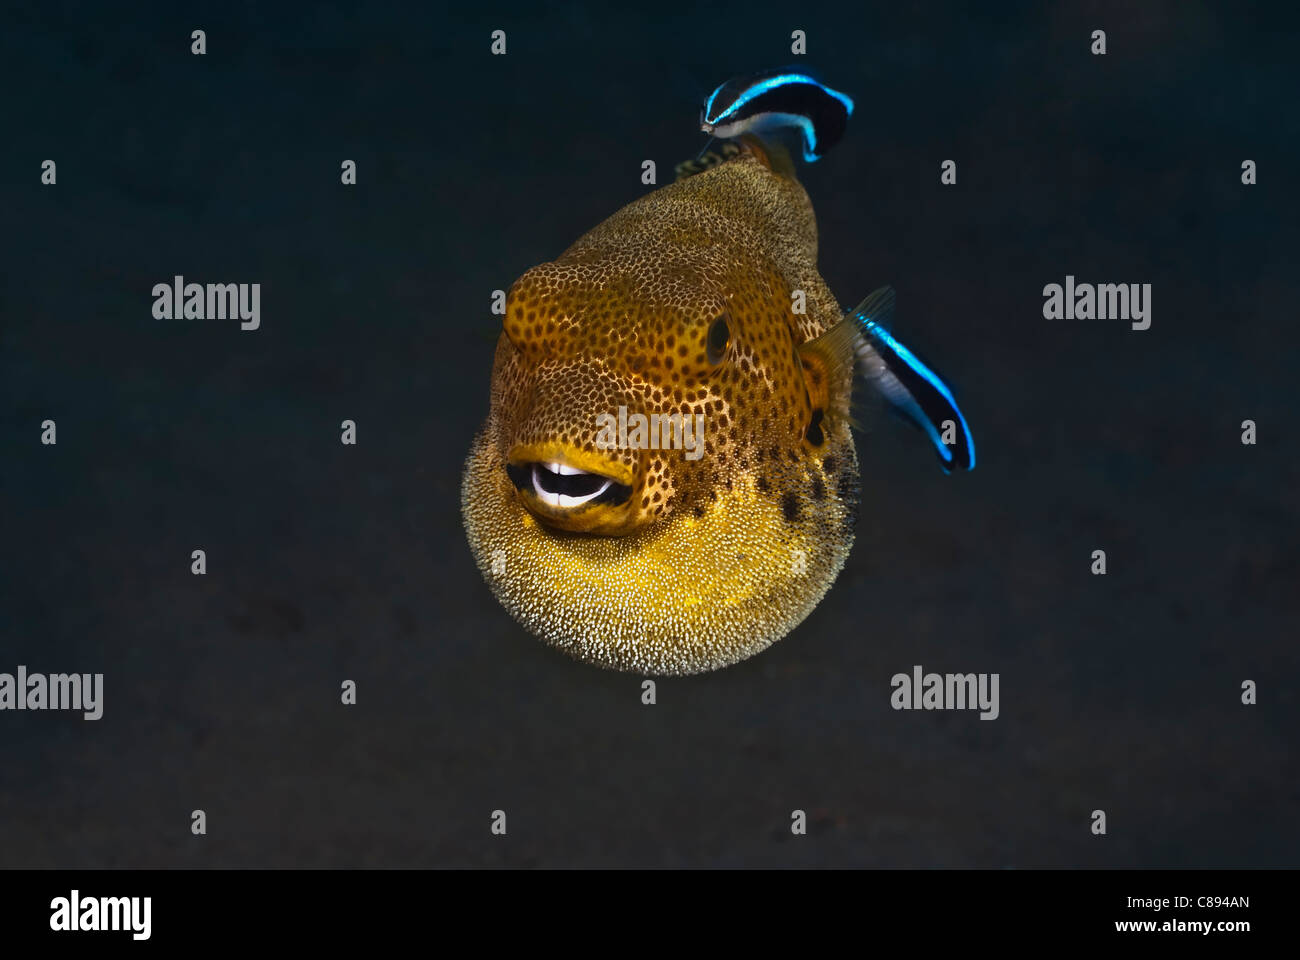 Puffed up Juvenile Starry Pufferfish with cleaner wrasse under water. Stock Photo